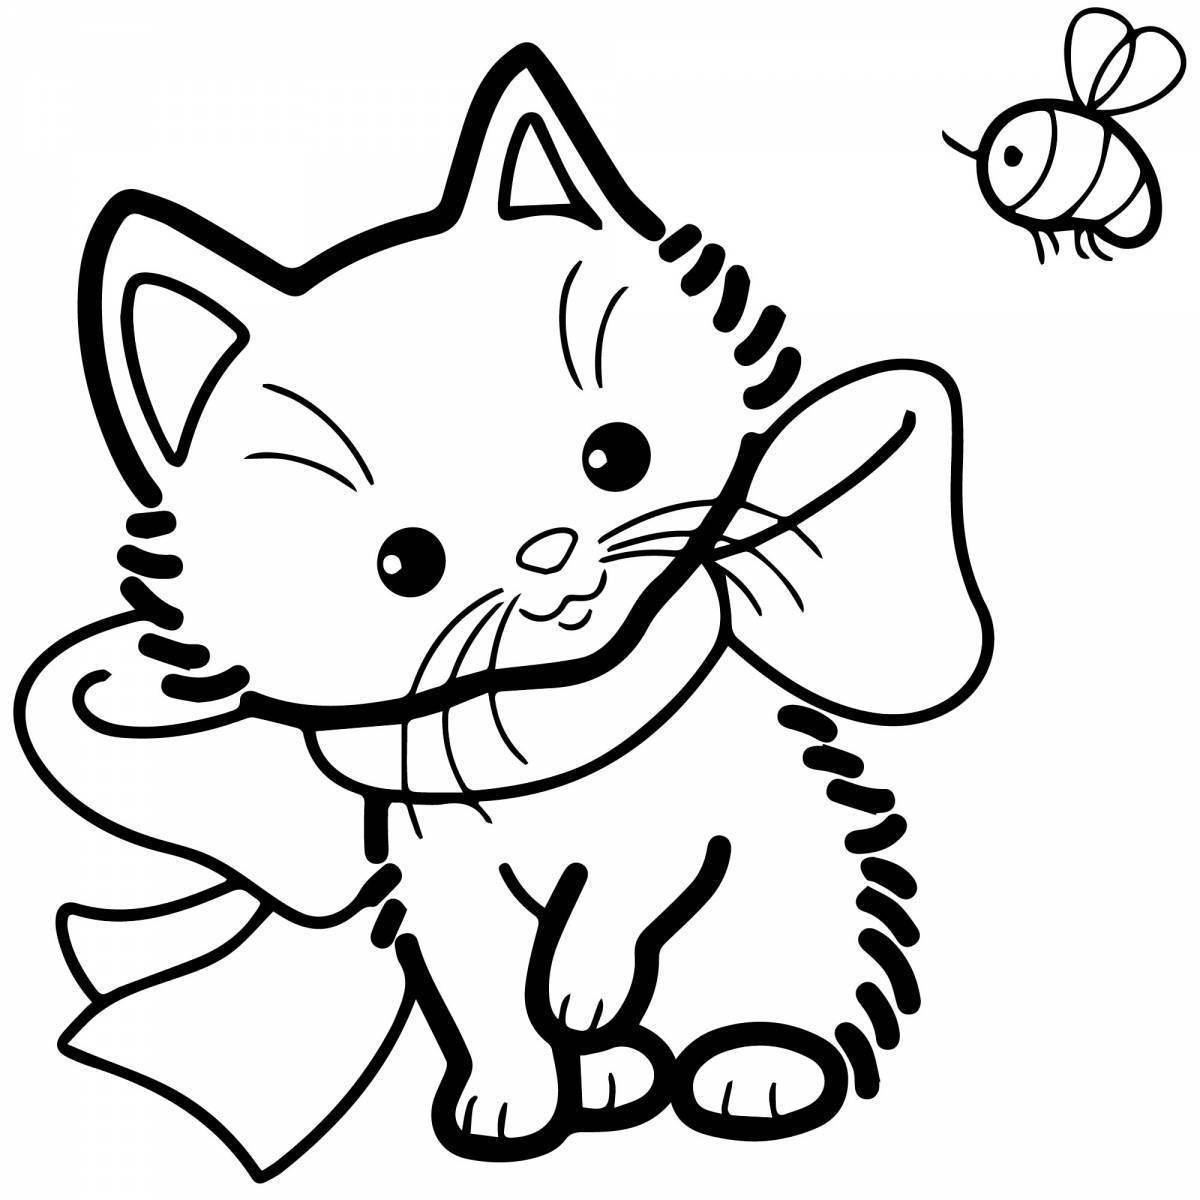 Coloring page wild little cat